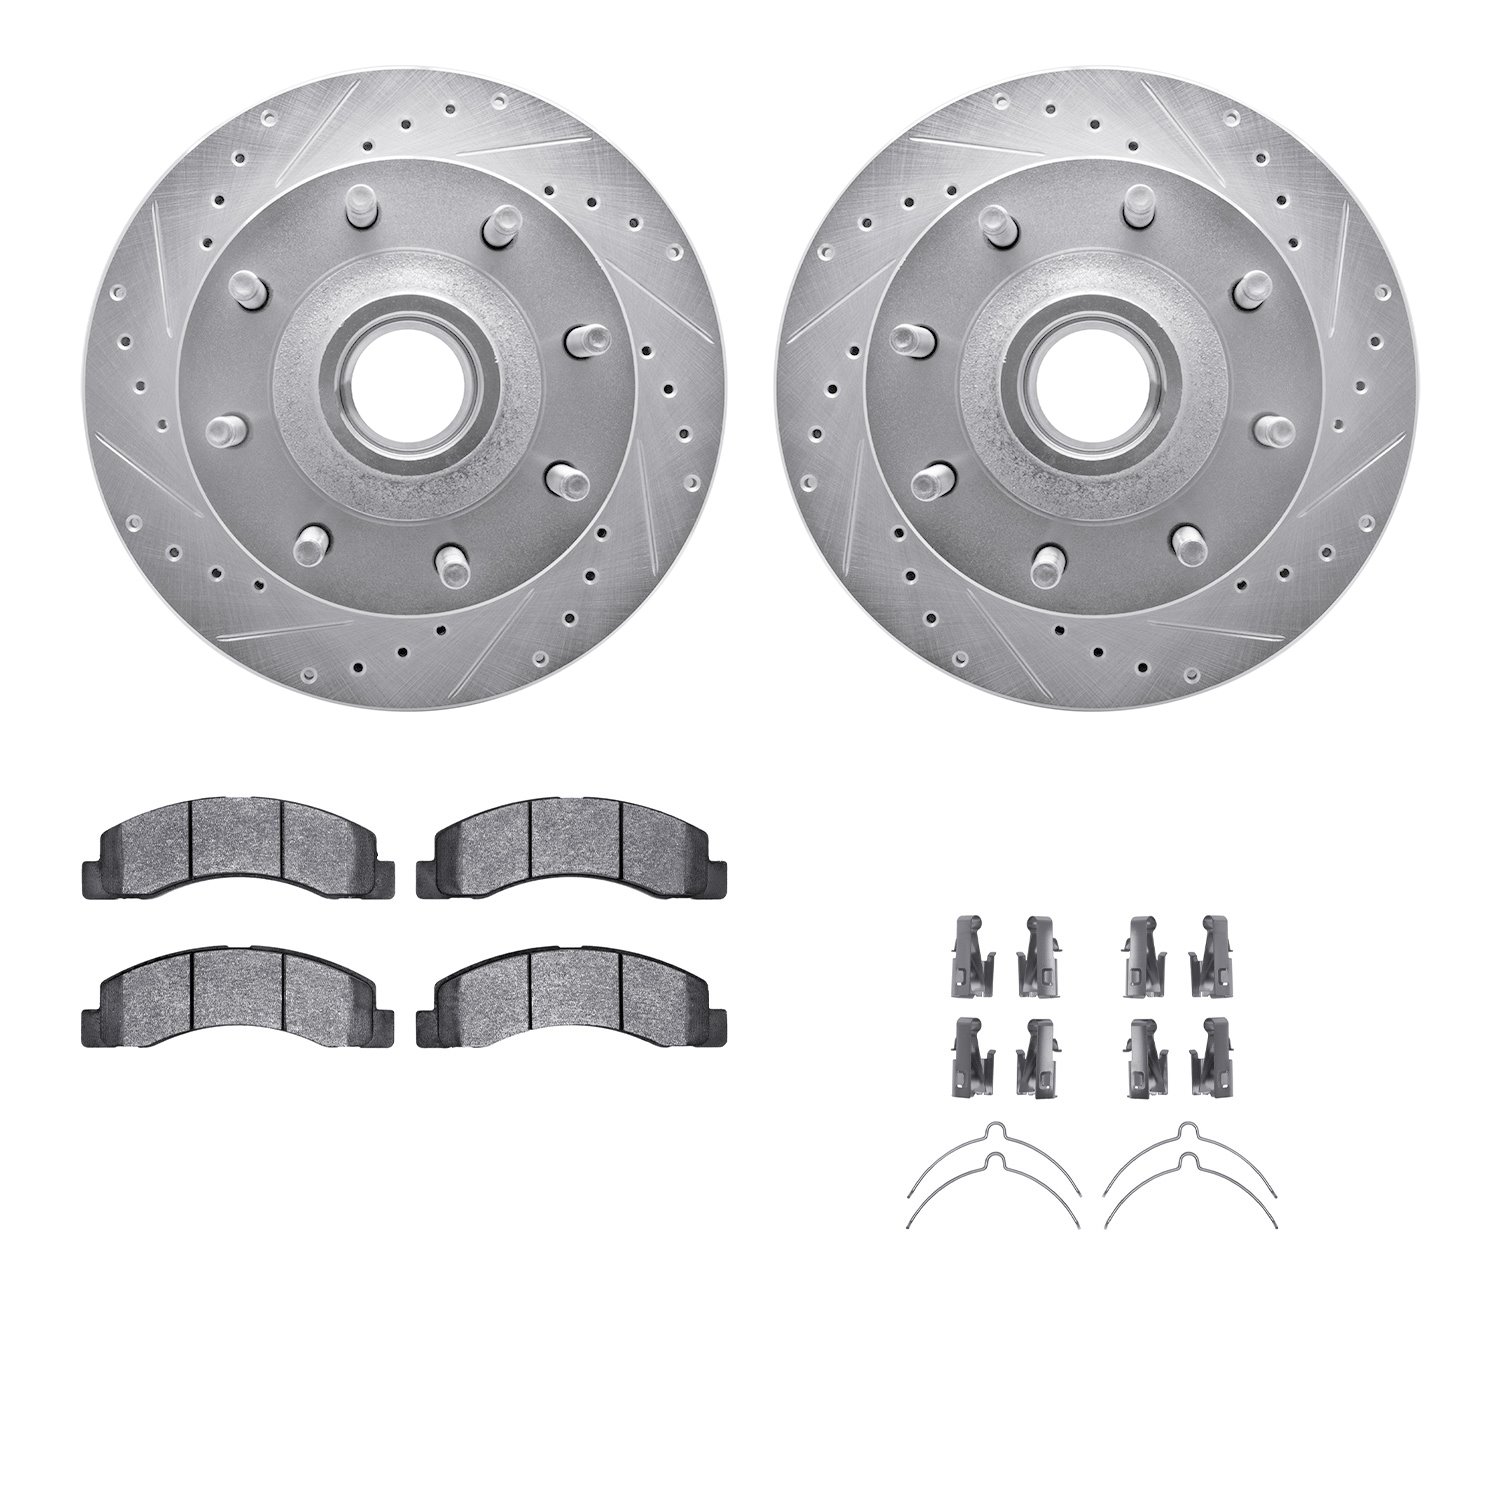 7412-54077 Drilled/Slotted Brake Rotors with Ultimate-Duty Brake Pads Kit & Hardware [Silver], 2003-2005 Ford/Lincoln/Mercury/Ma